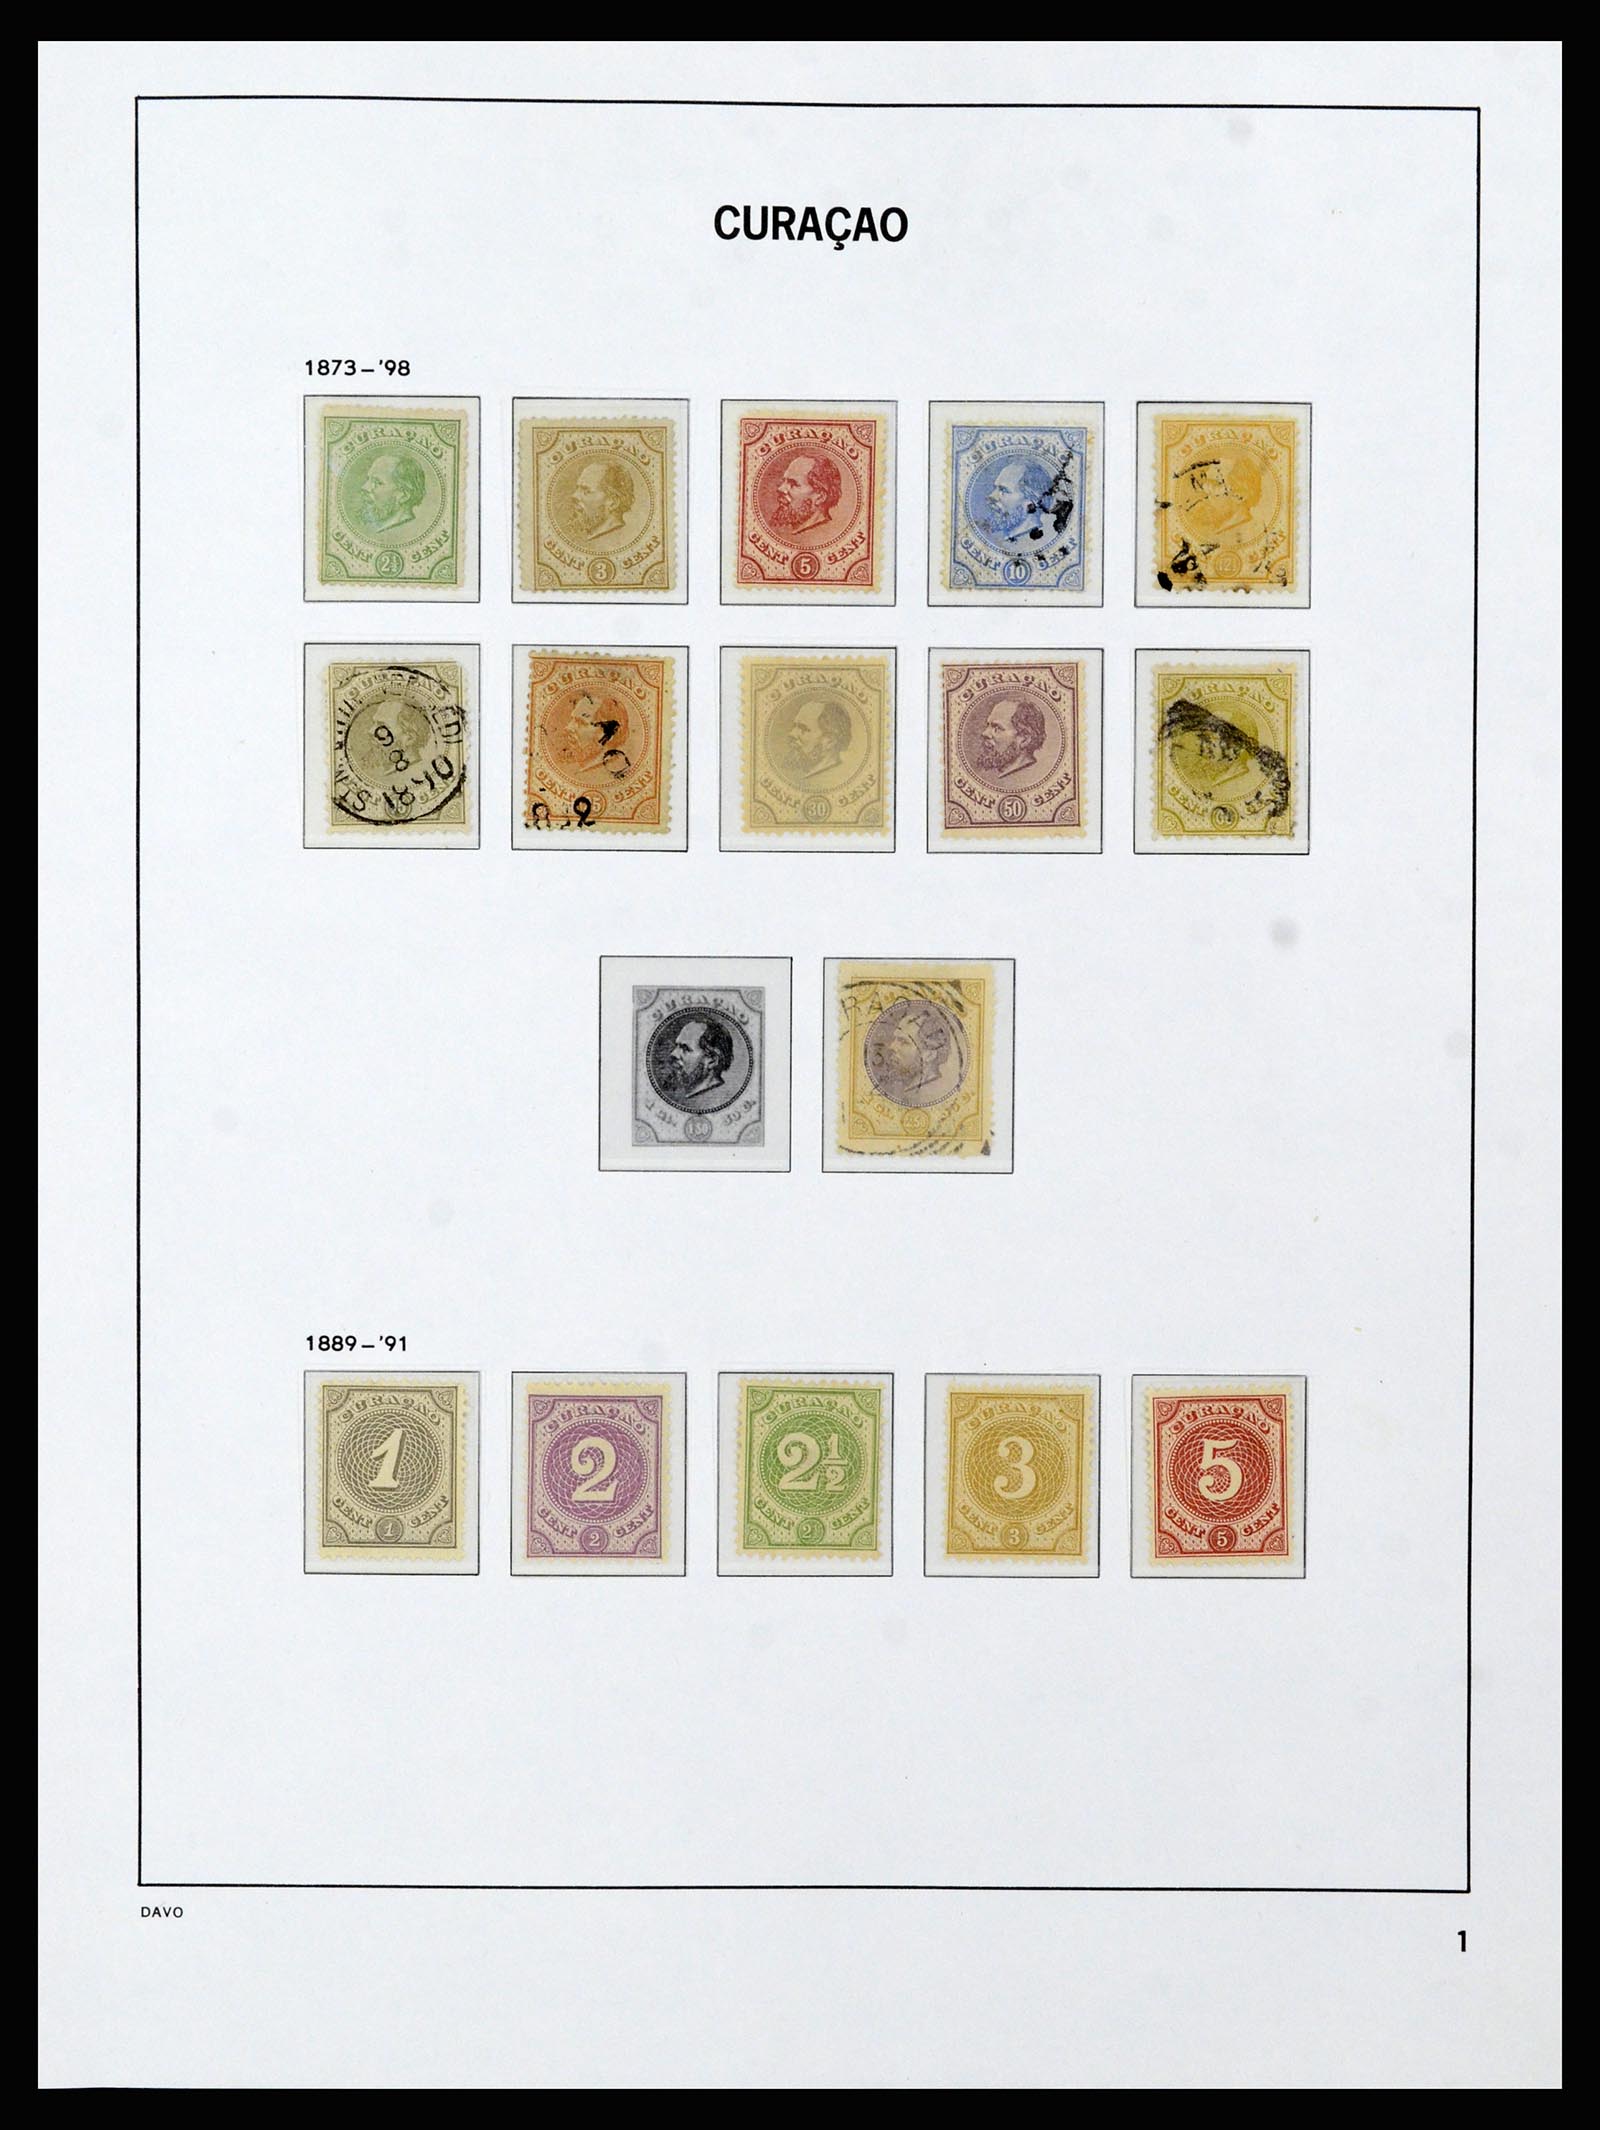 37182 001 - Stamp collection 37182 Curaçao and Dutch Antilles 1873-2010.